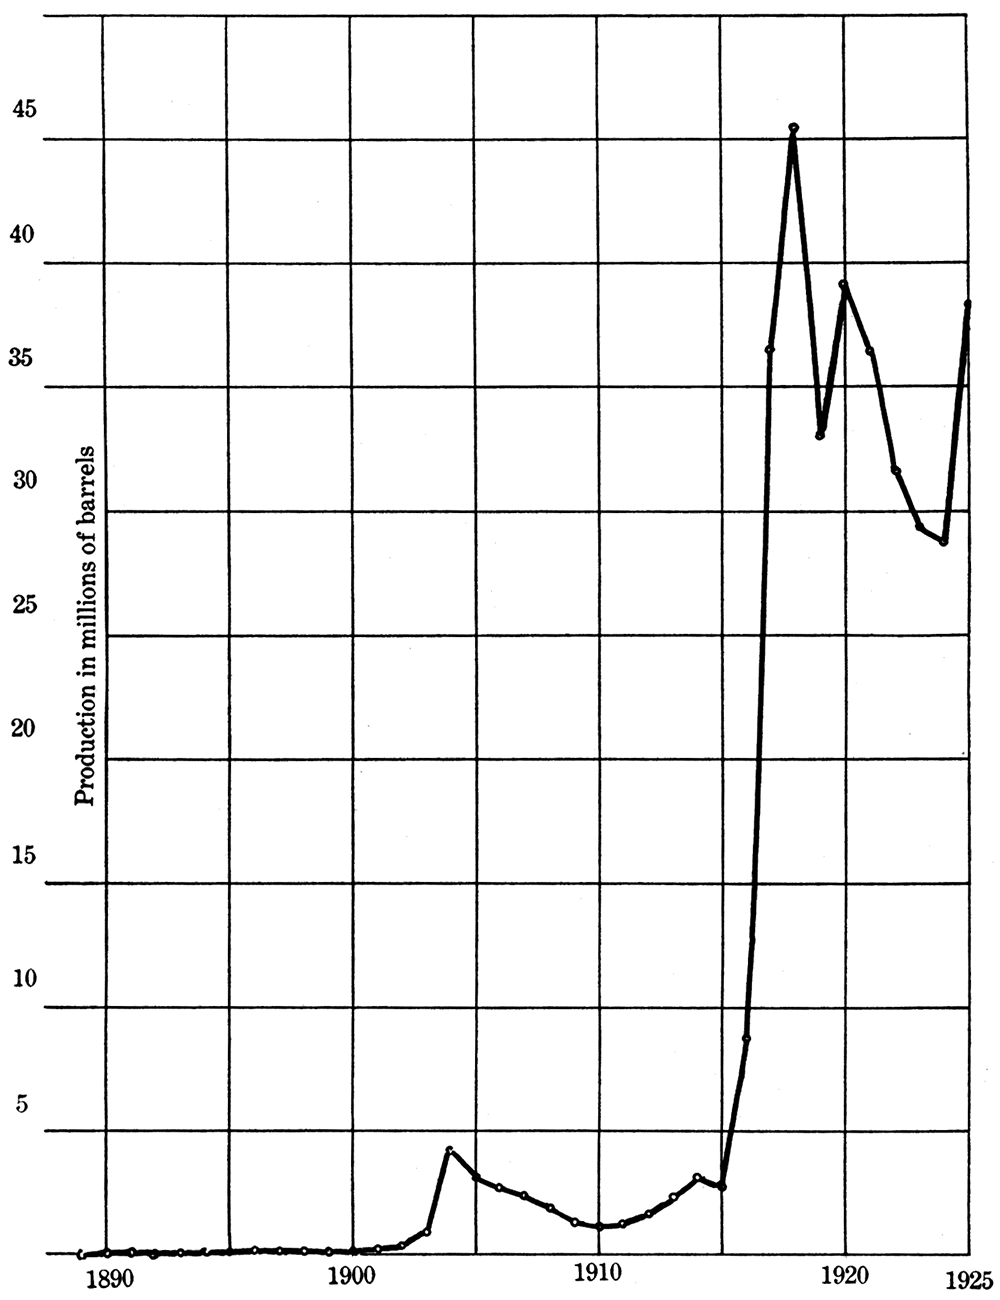 Curve showing production, in barrels, of petroleum in Kansas since 1889.